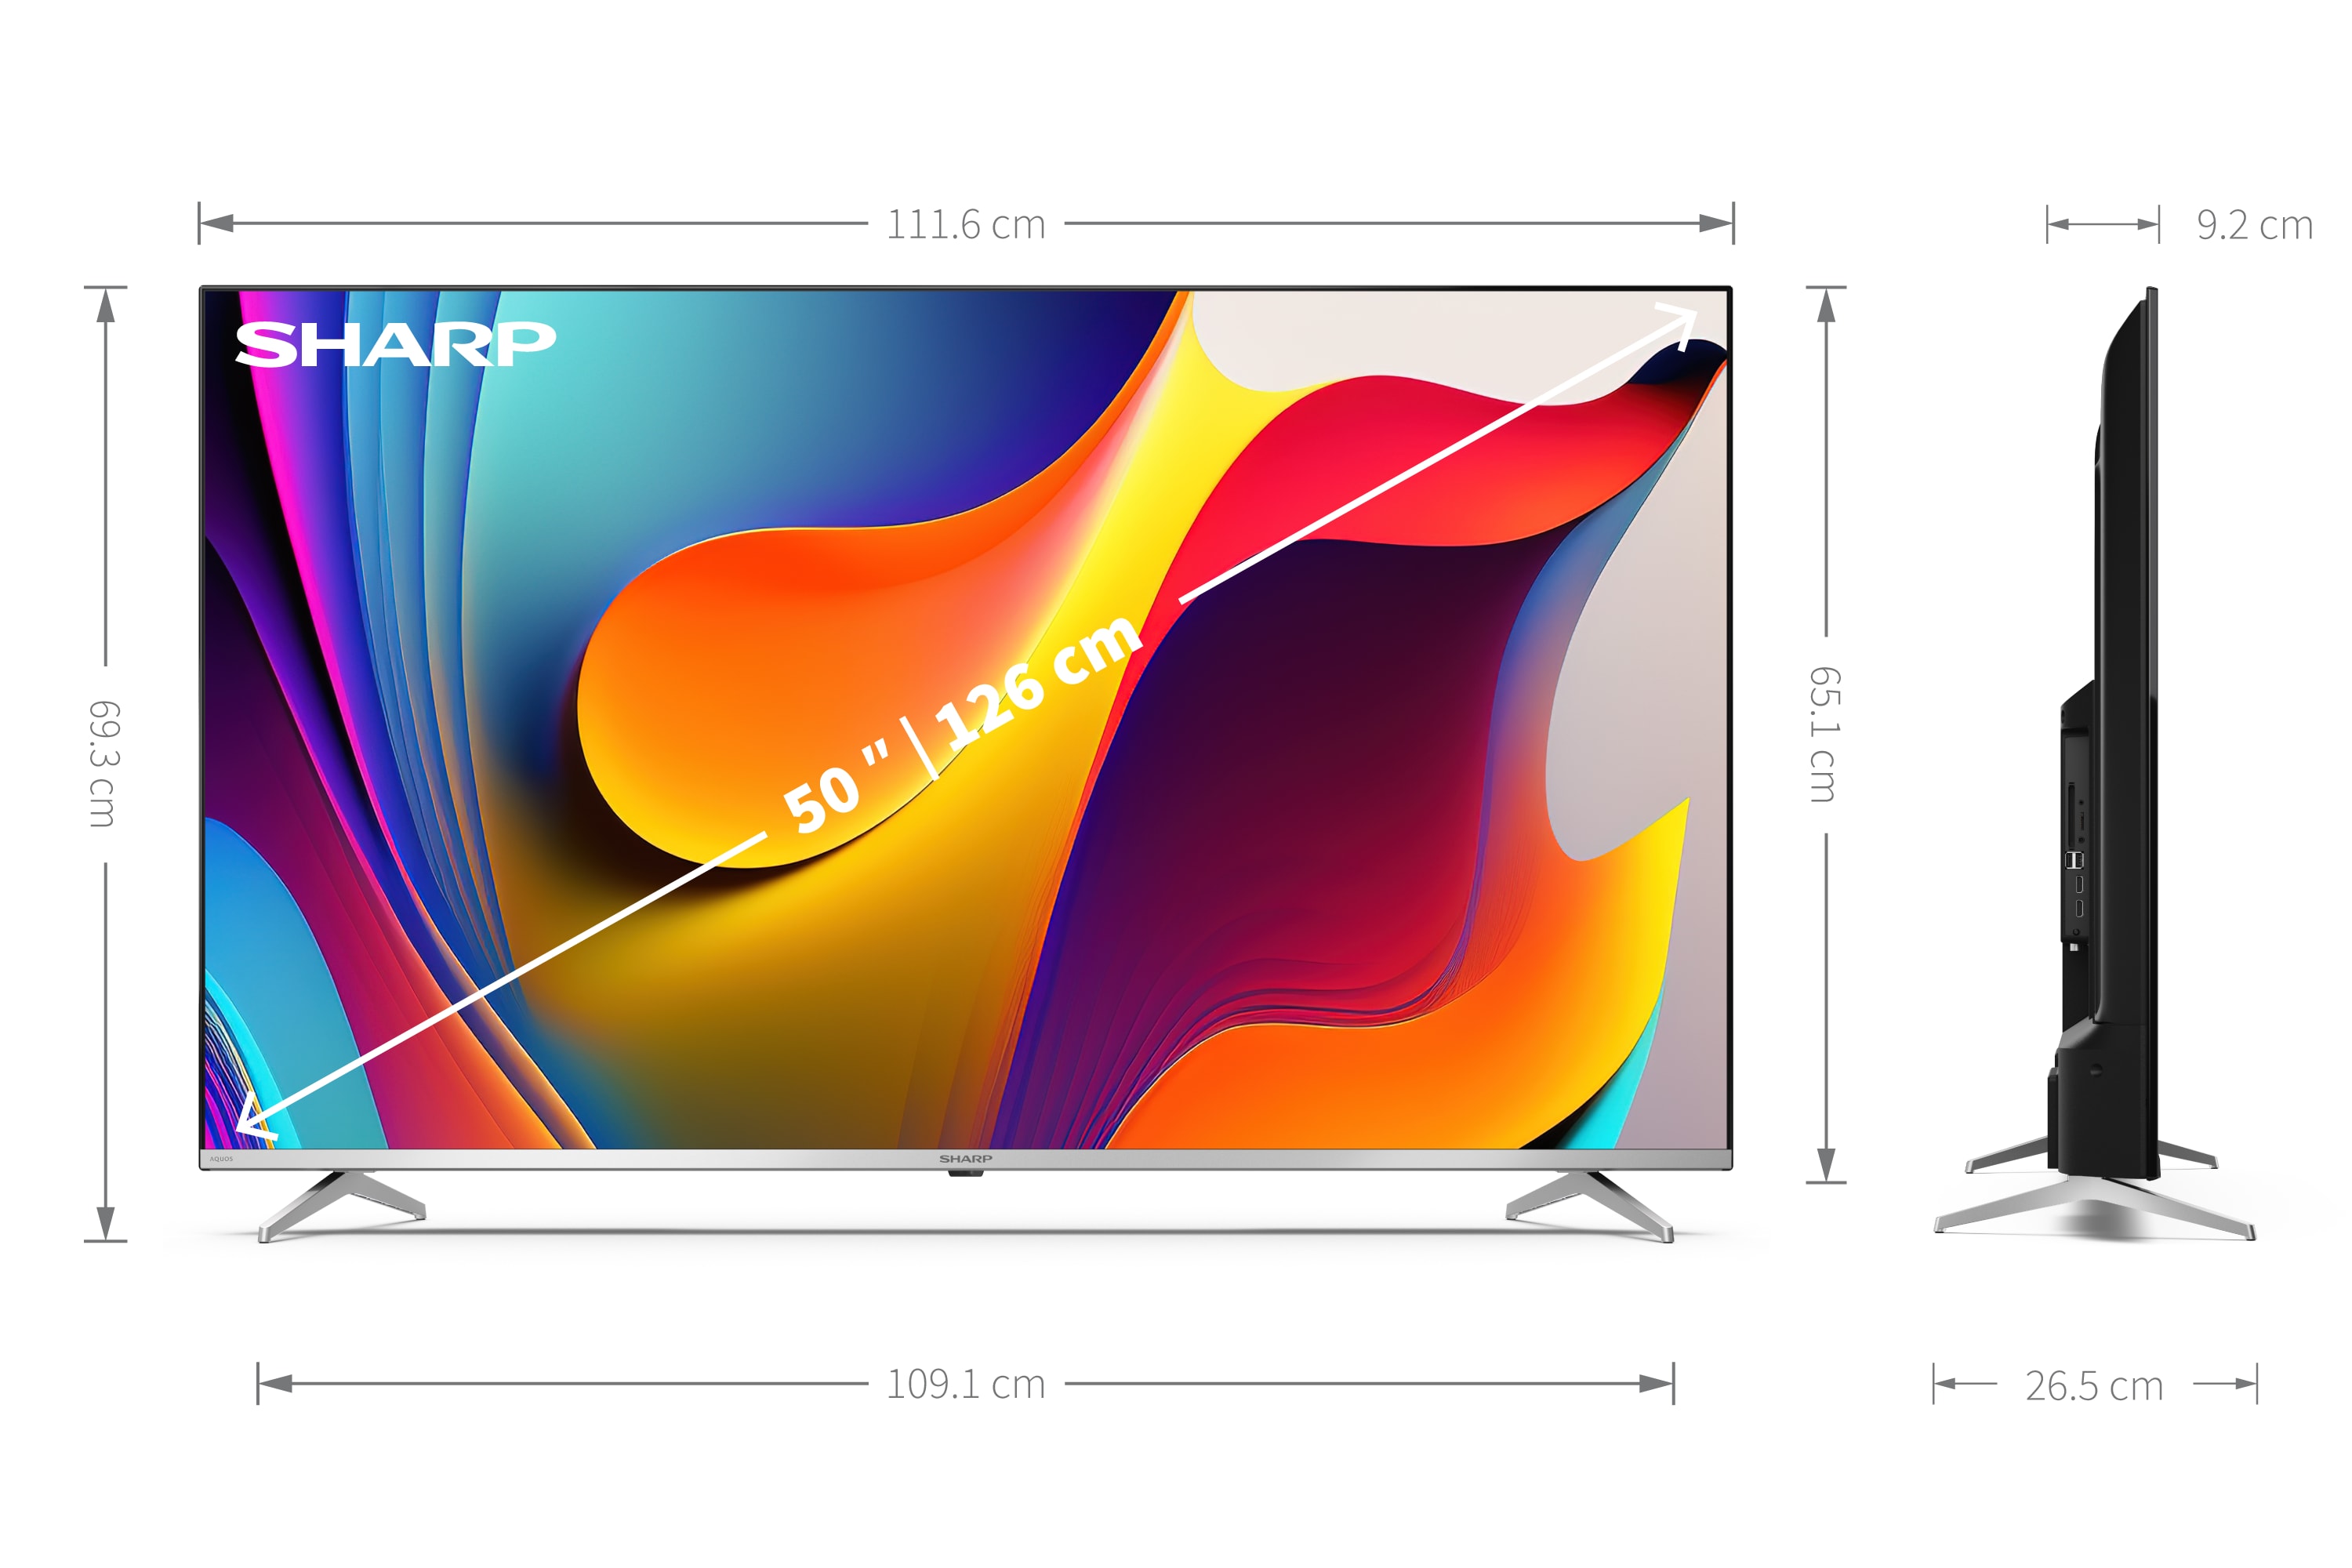 Android TV 4K UHD - 50" 4K ULTRA HD QUANTUM DOT SHARP ANDROID TV™